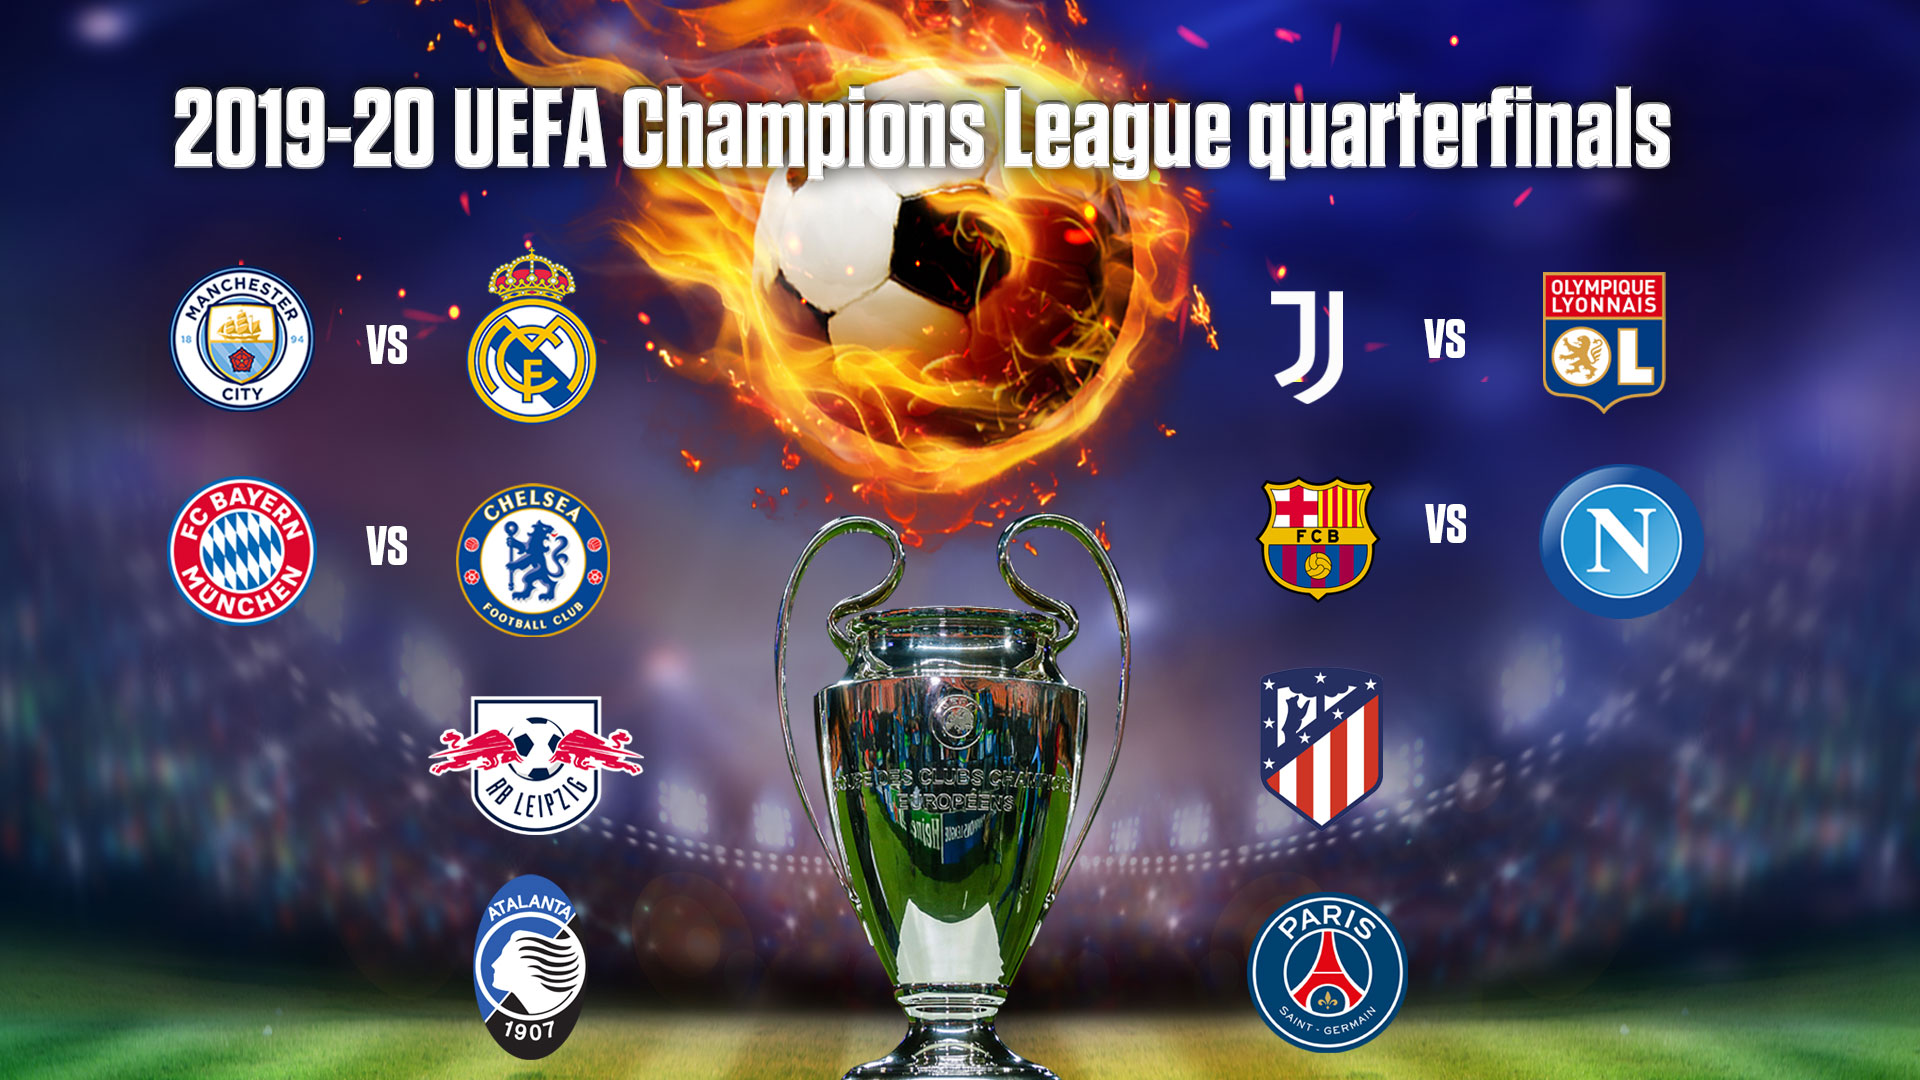 Bayern draw PSG in Champions League quarters as Real Madrid face